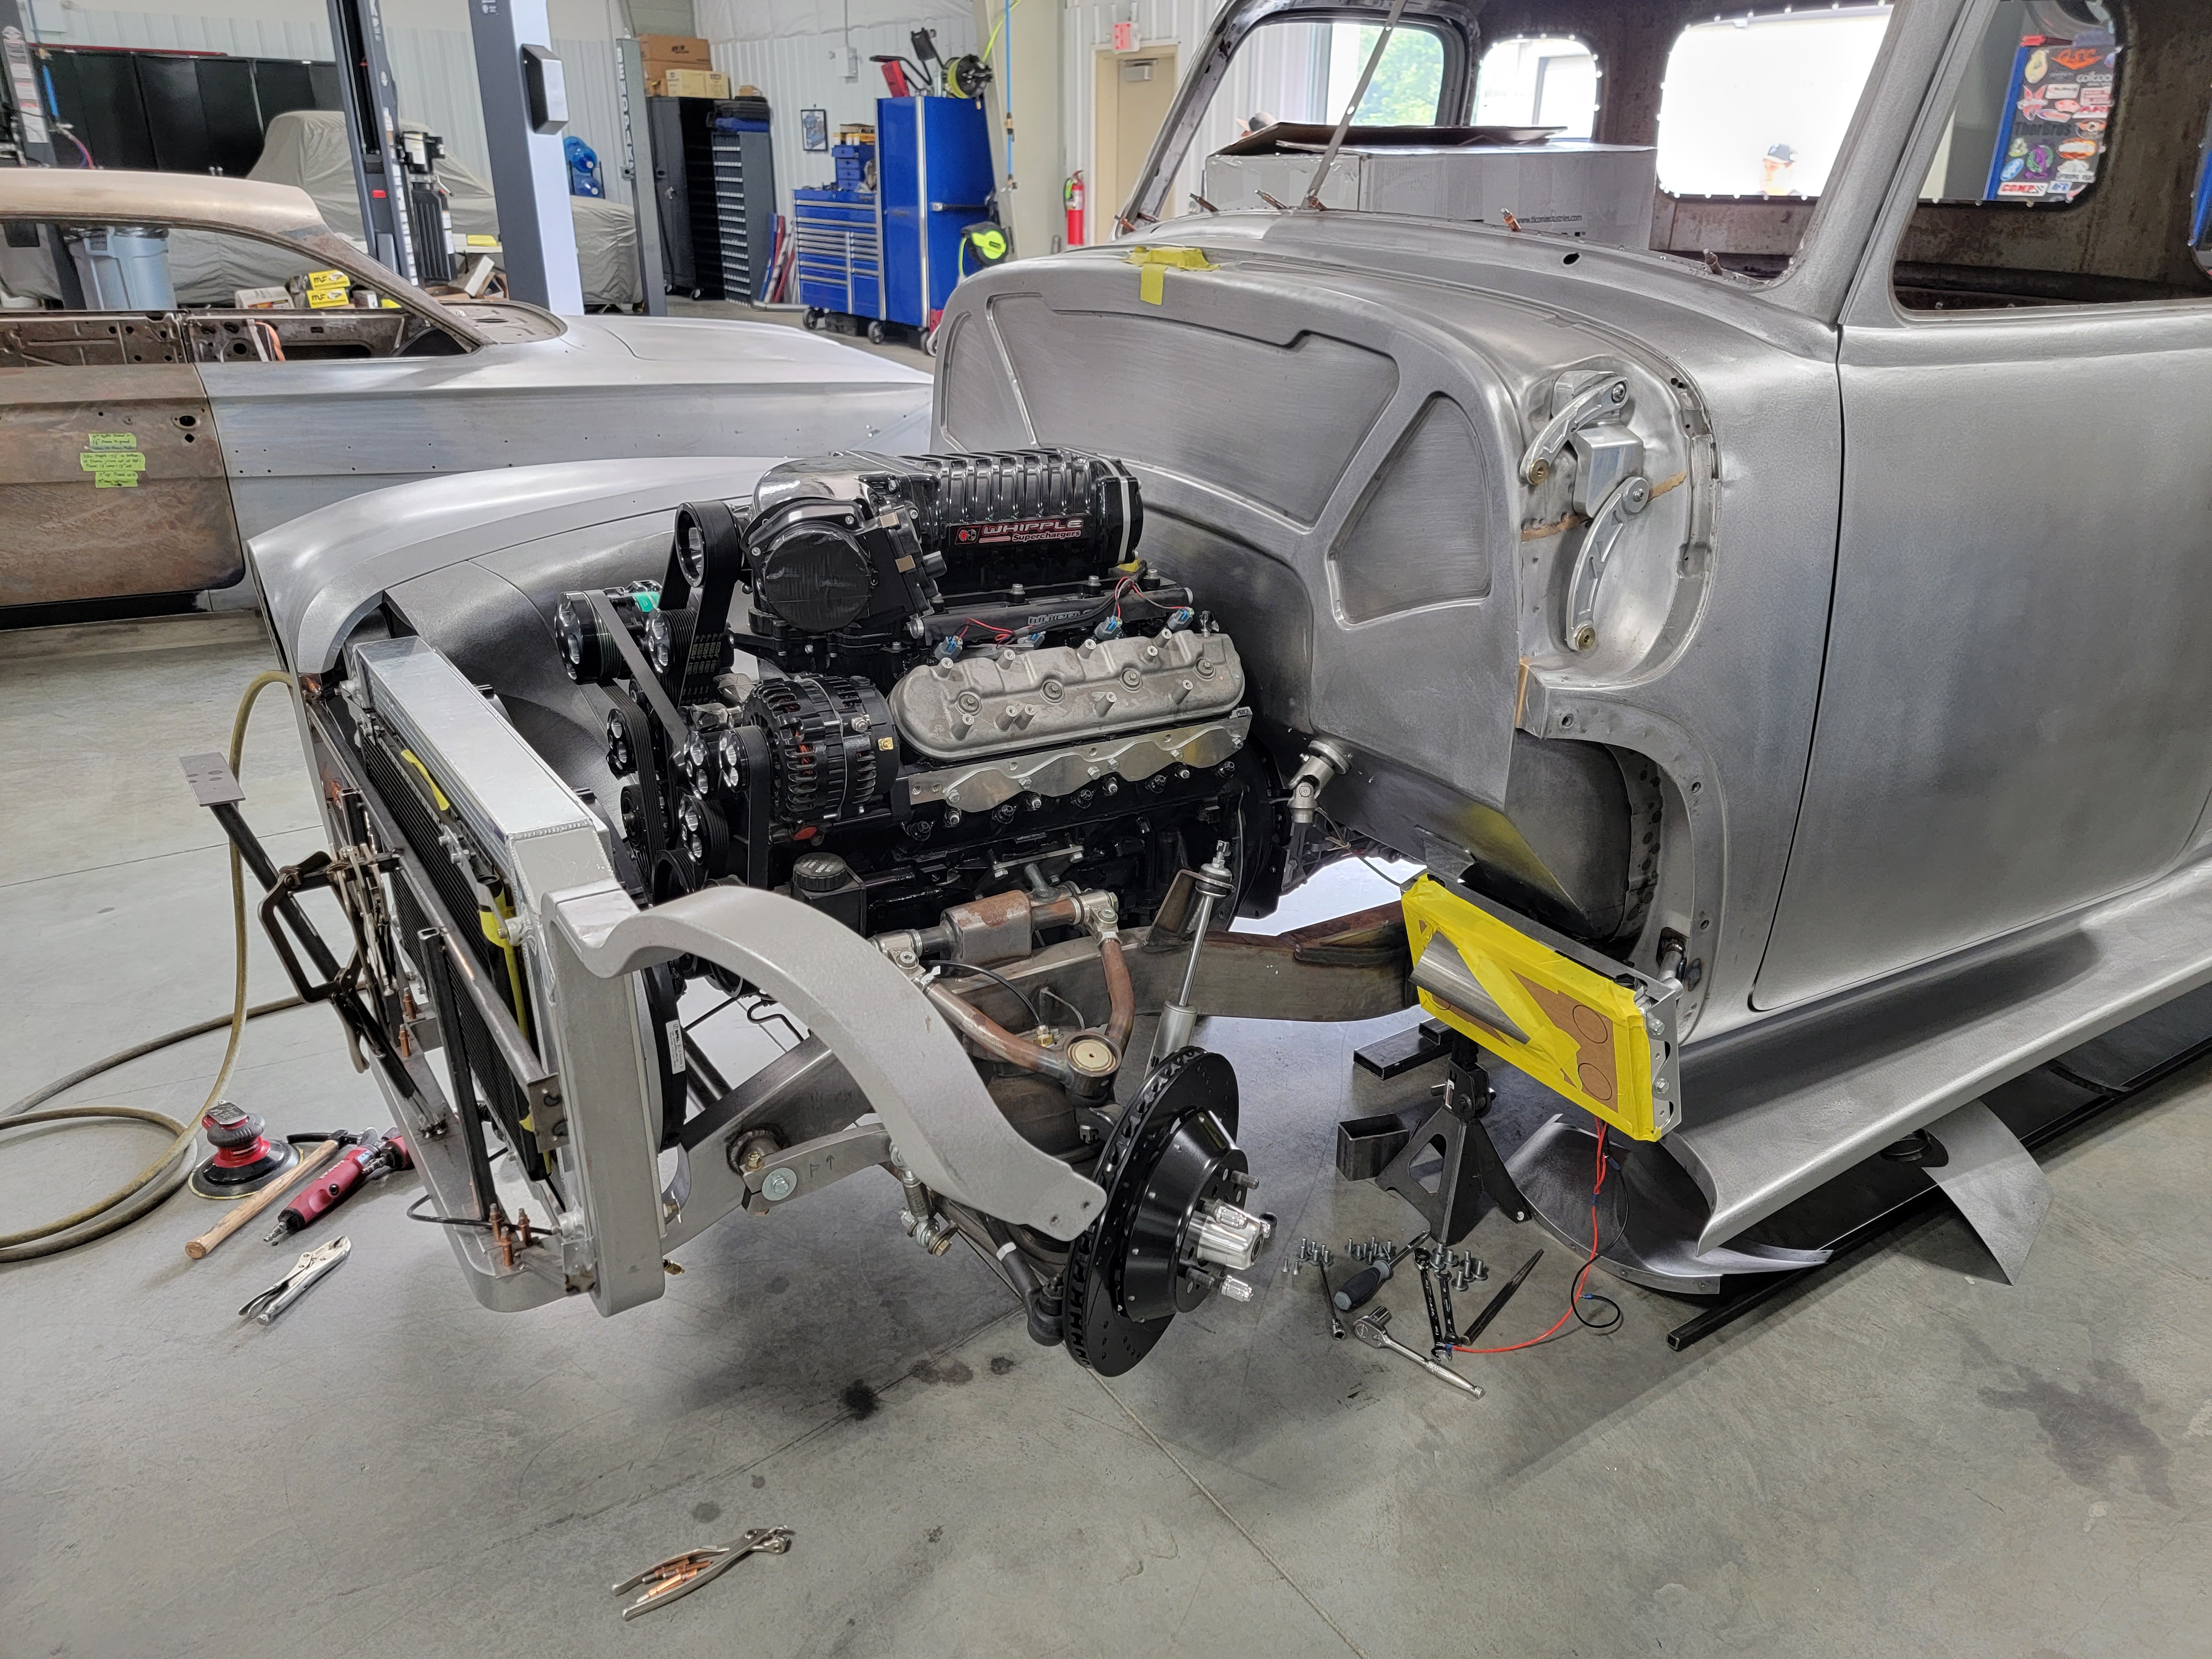 scotts-hotrods-51-chevy-project-truck-2962